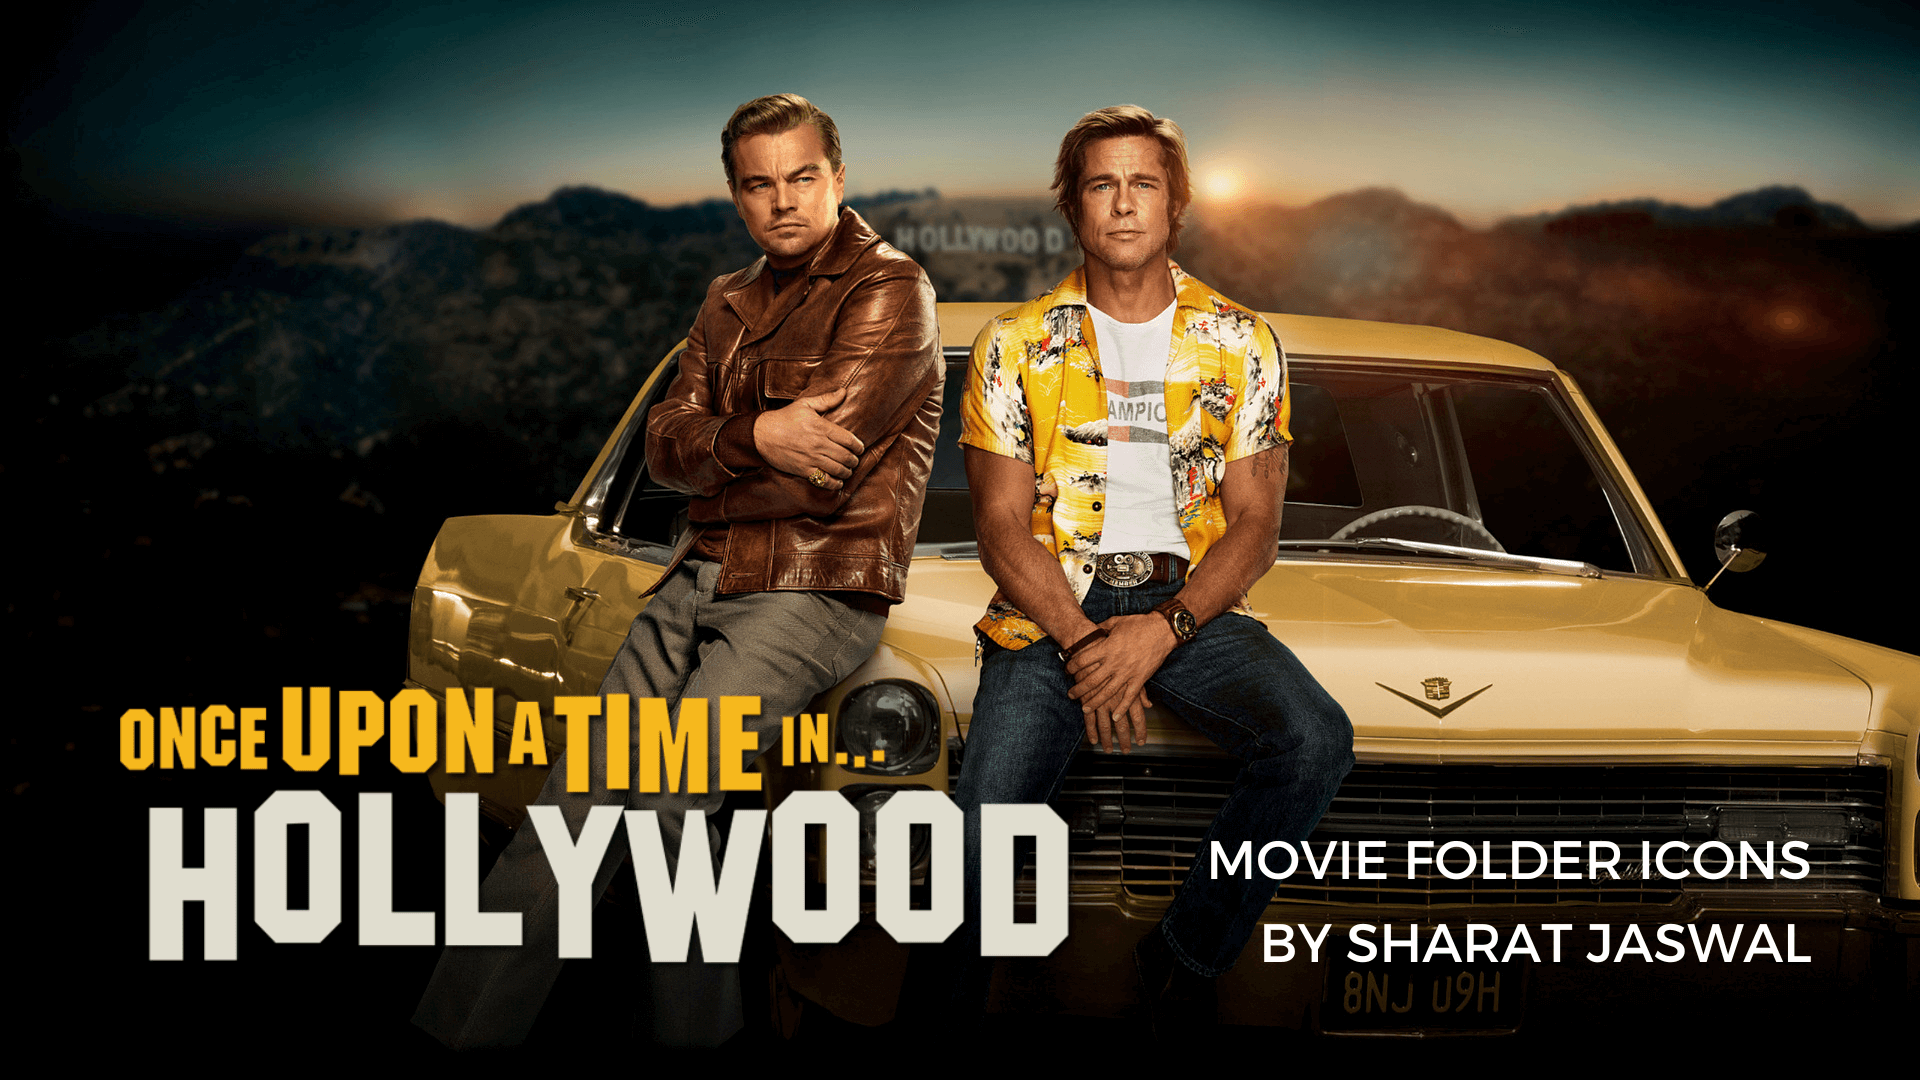 Once Upon A Time In Hollywood folder icons